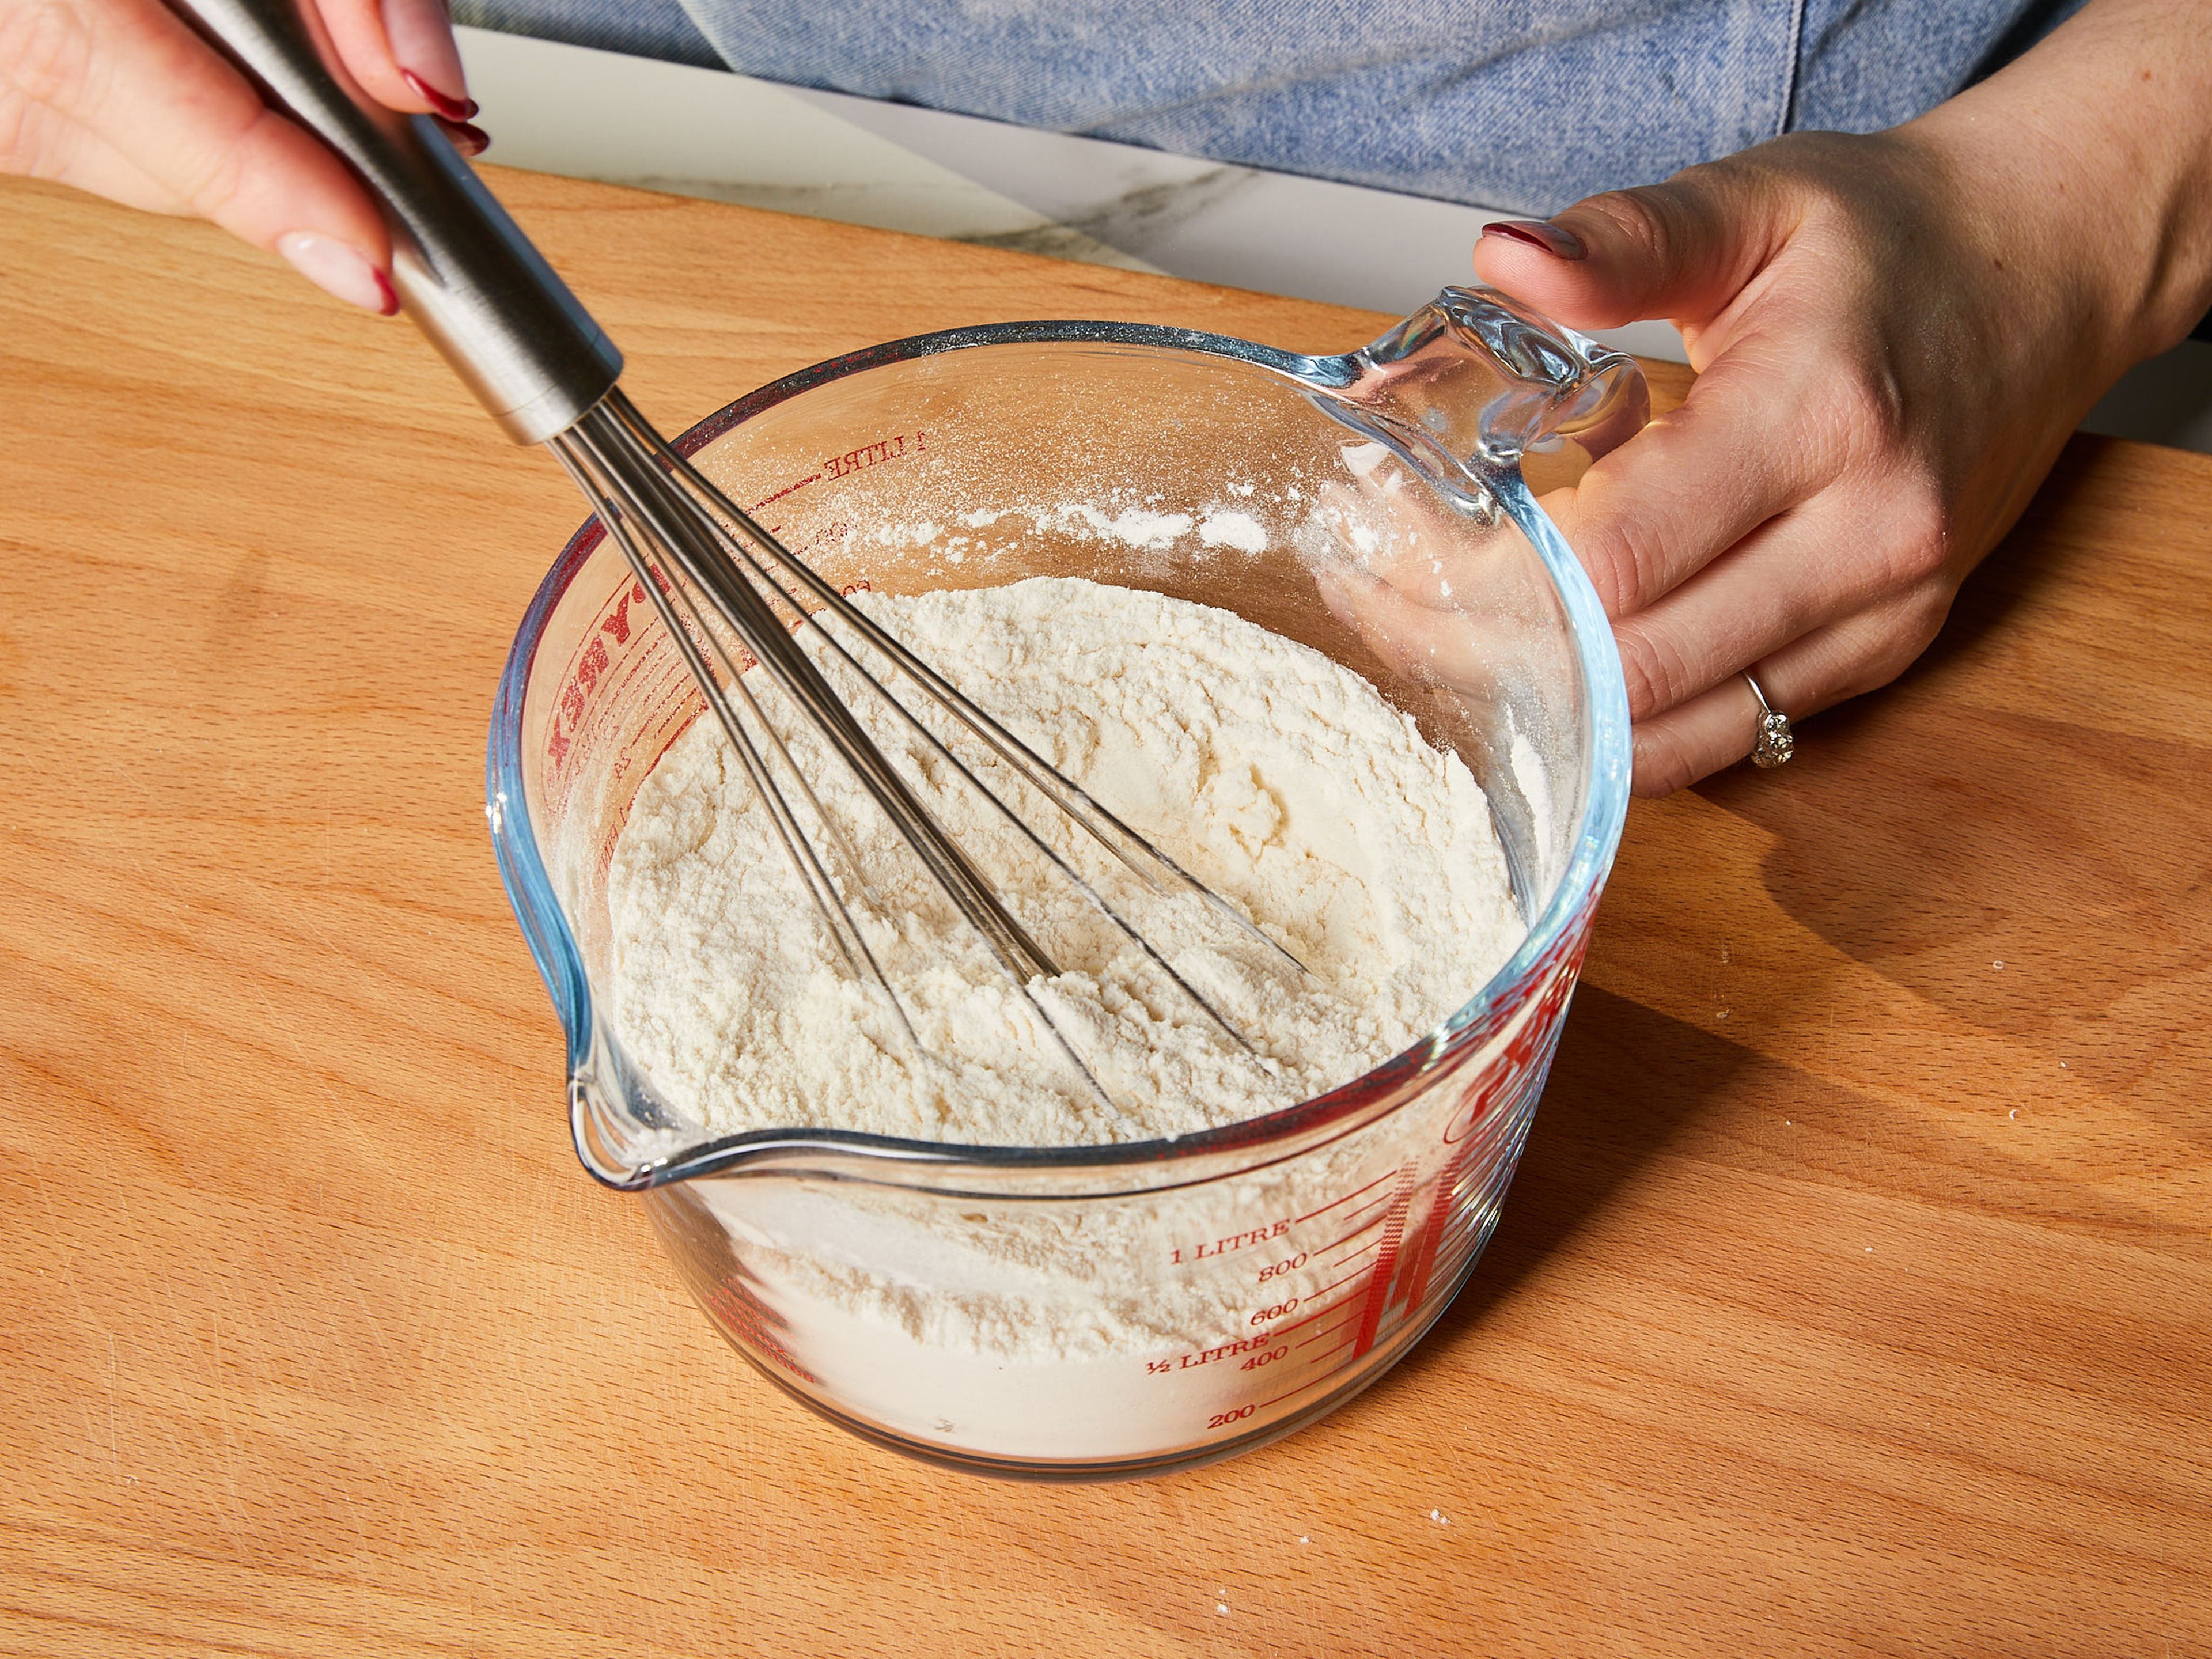 Mix the flour, baking powder, sugar and salt in a large measuring cup and set aside.